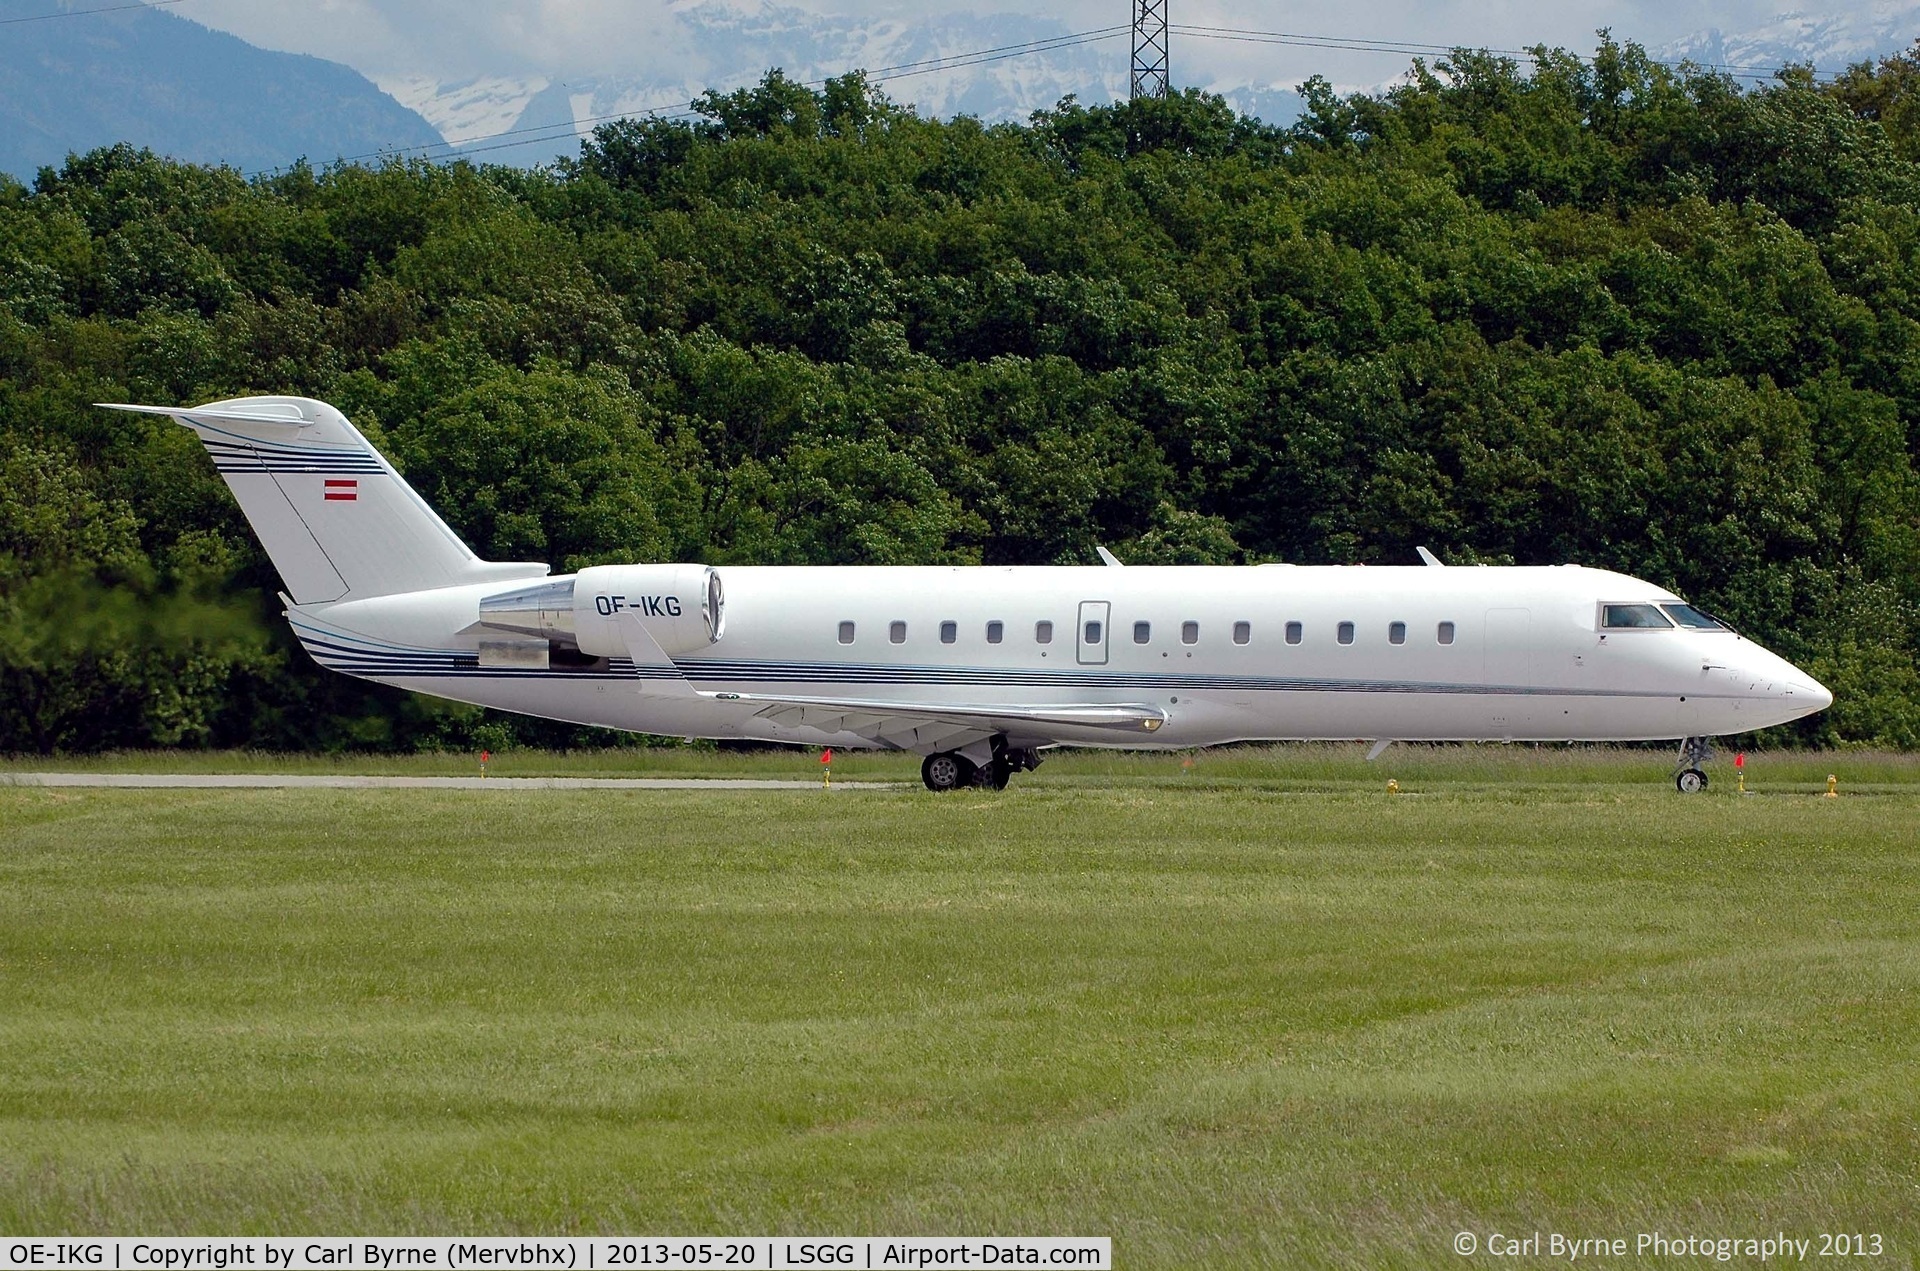 OE-IKG, 2006 Bombardier Challenger 850 (CL-600-2B19 ) C/N 8063, Taken from the park at the 05 threshold.